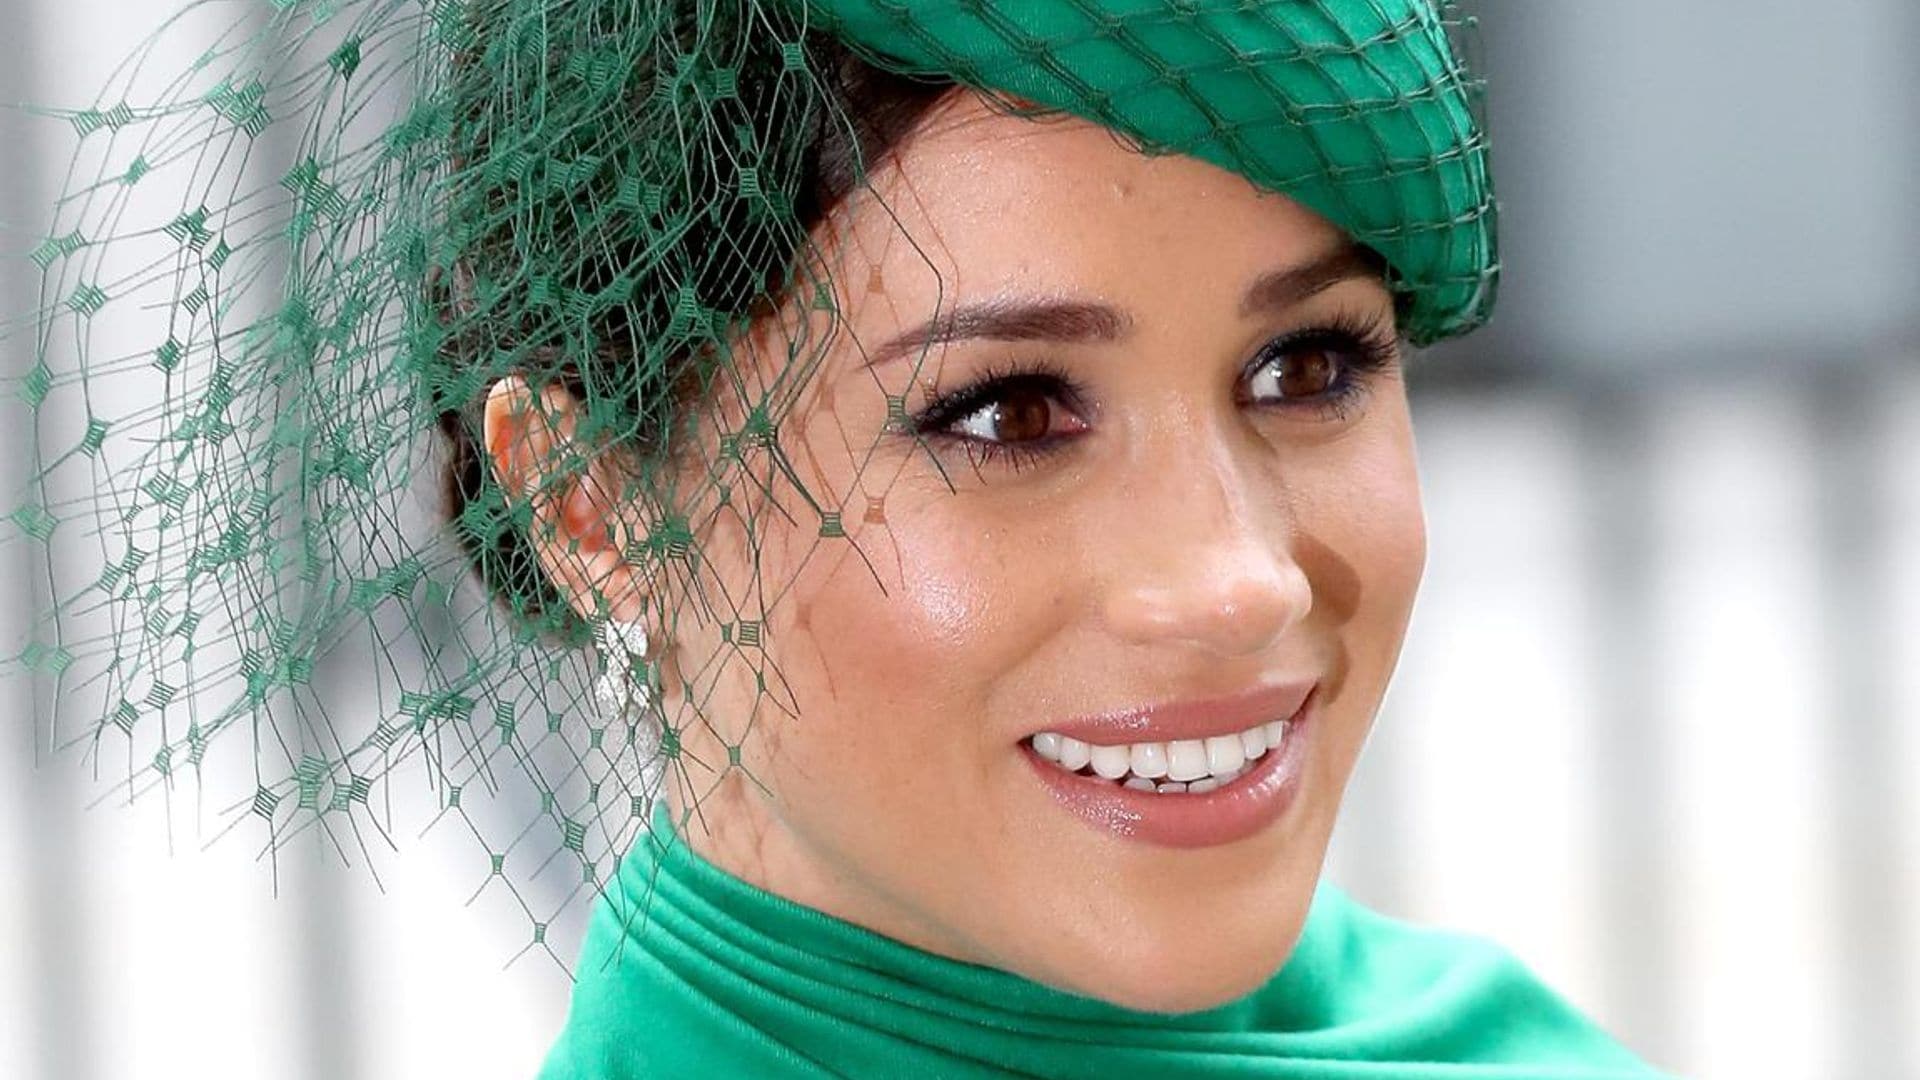 The 3 simple makeup secrets behind Meghan Markle’s perfect glow – including one we didn’t expect